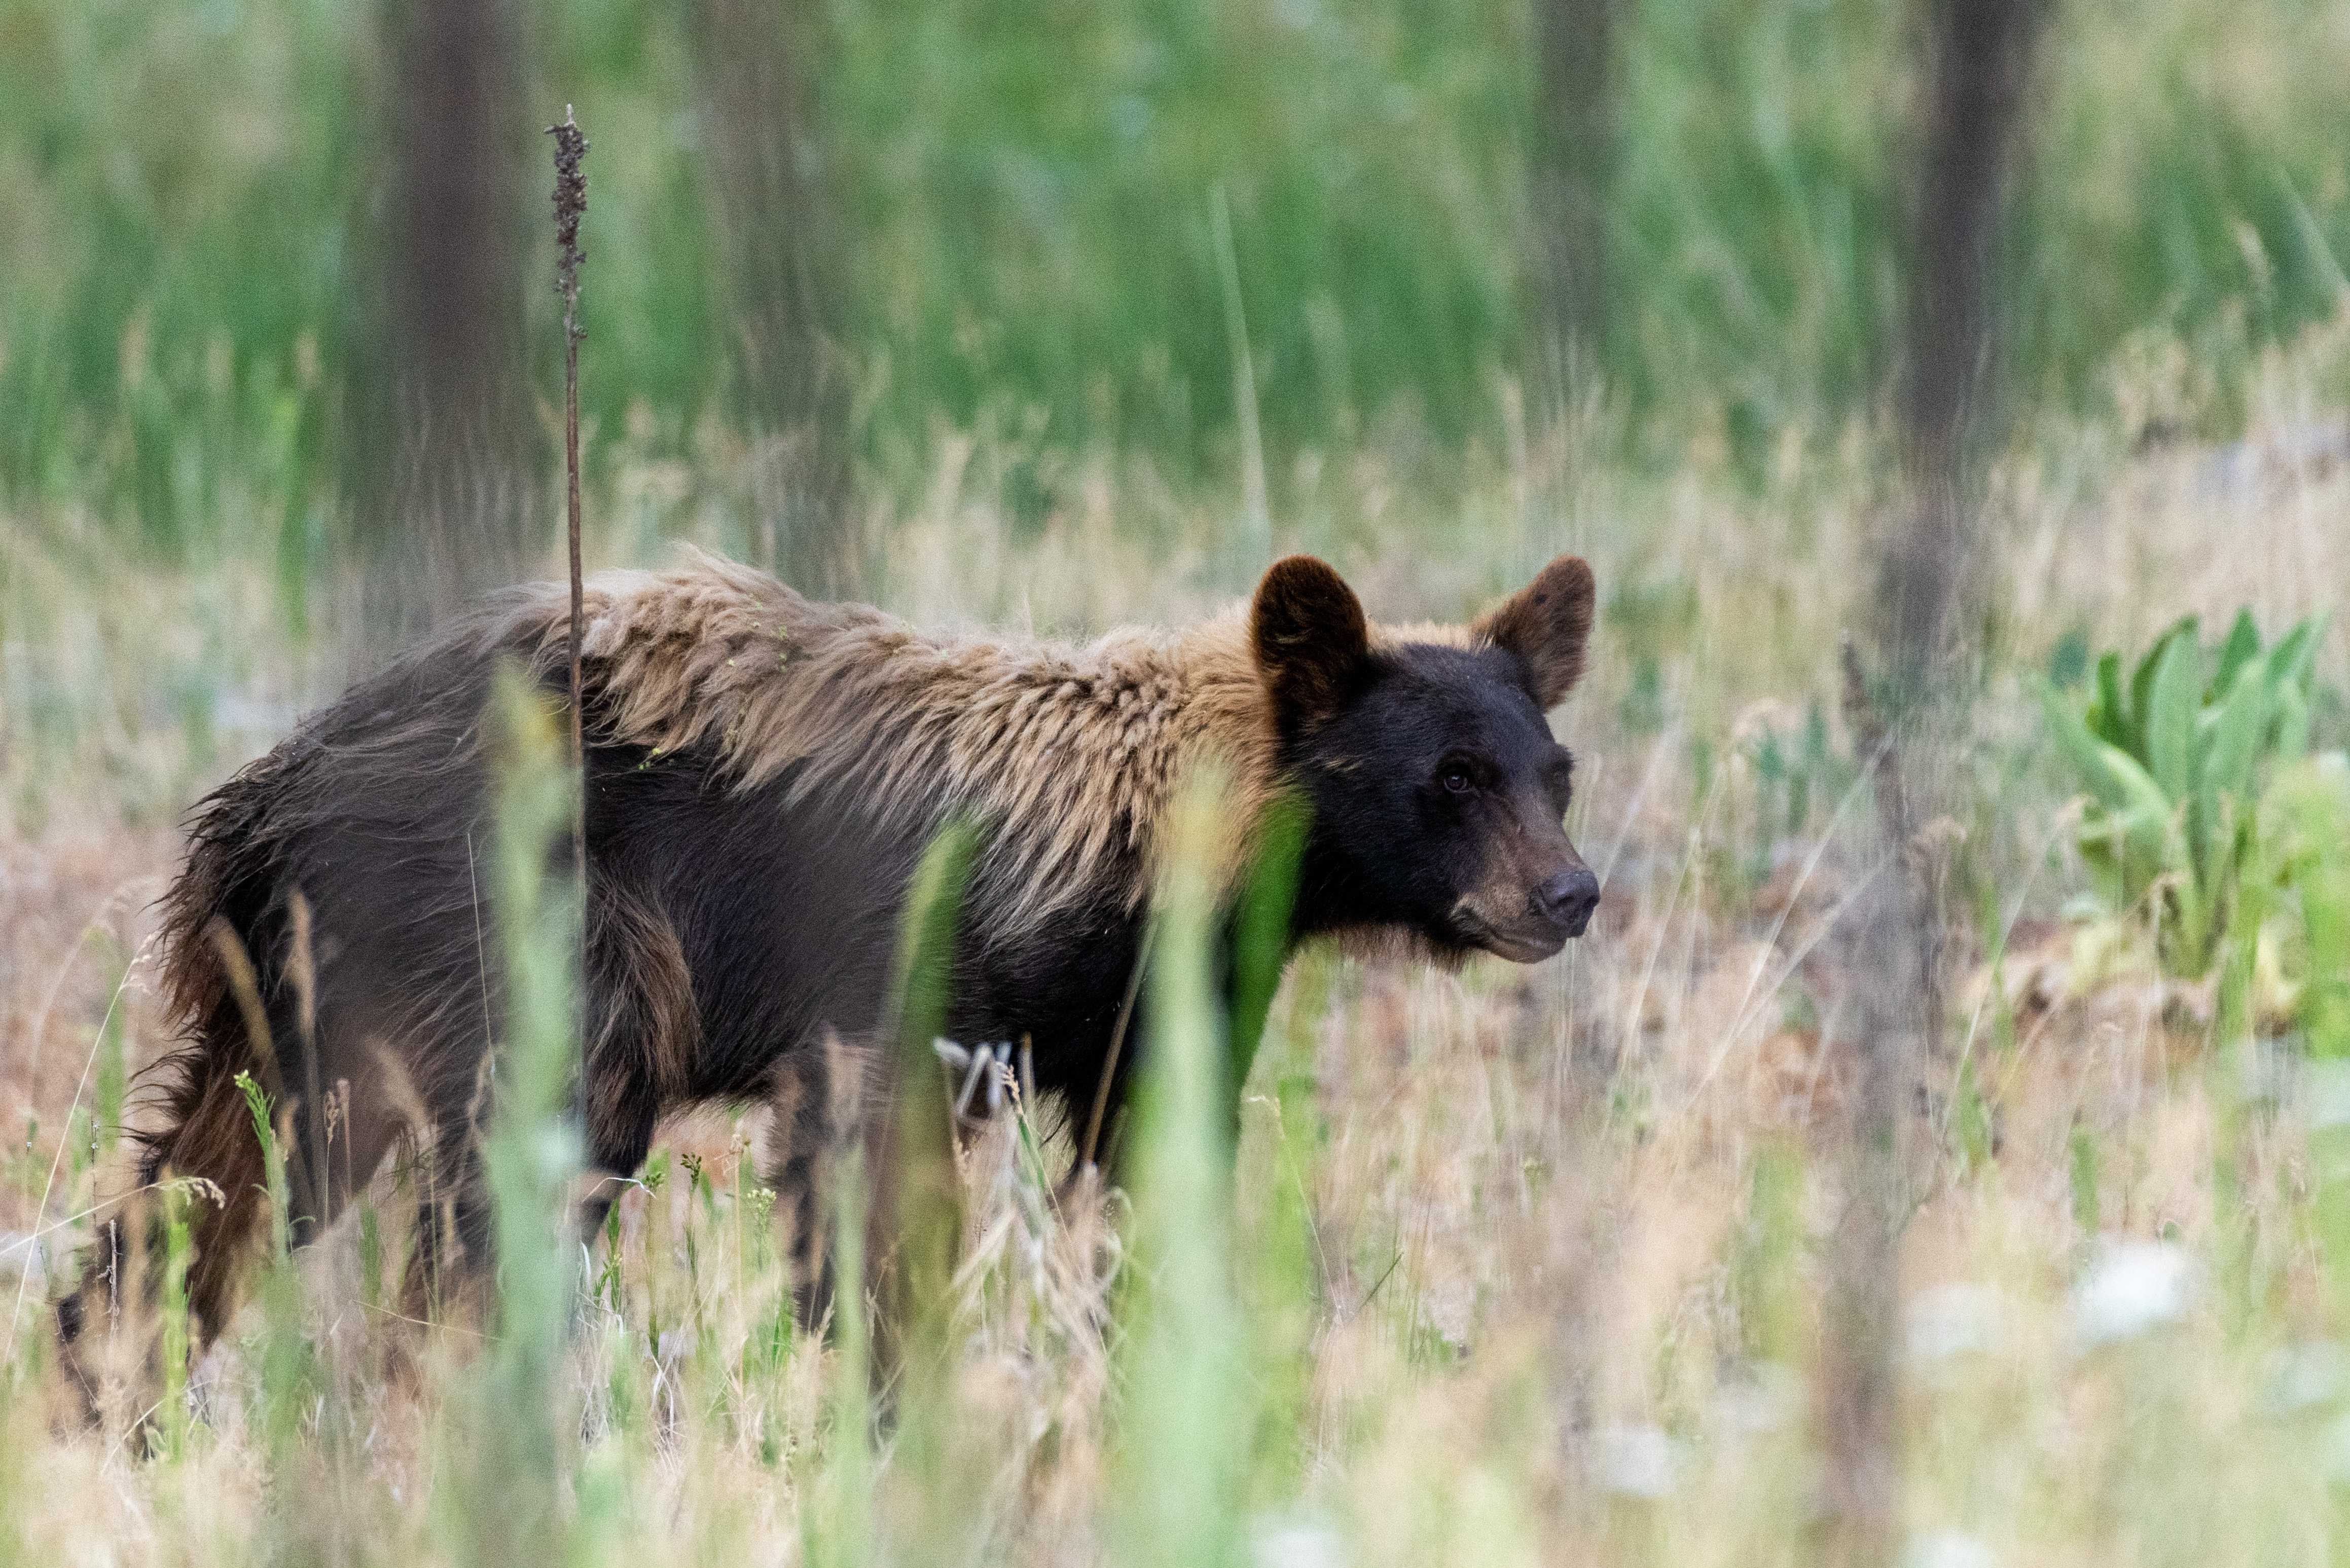 A black bear lumbering through old-growth ponderosa forest.